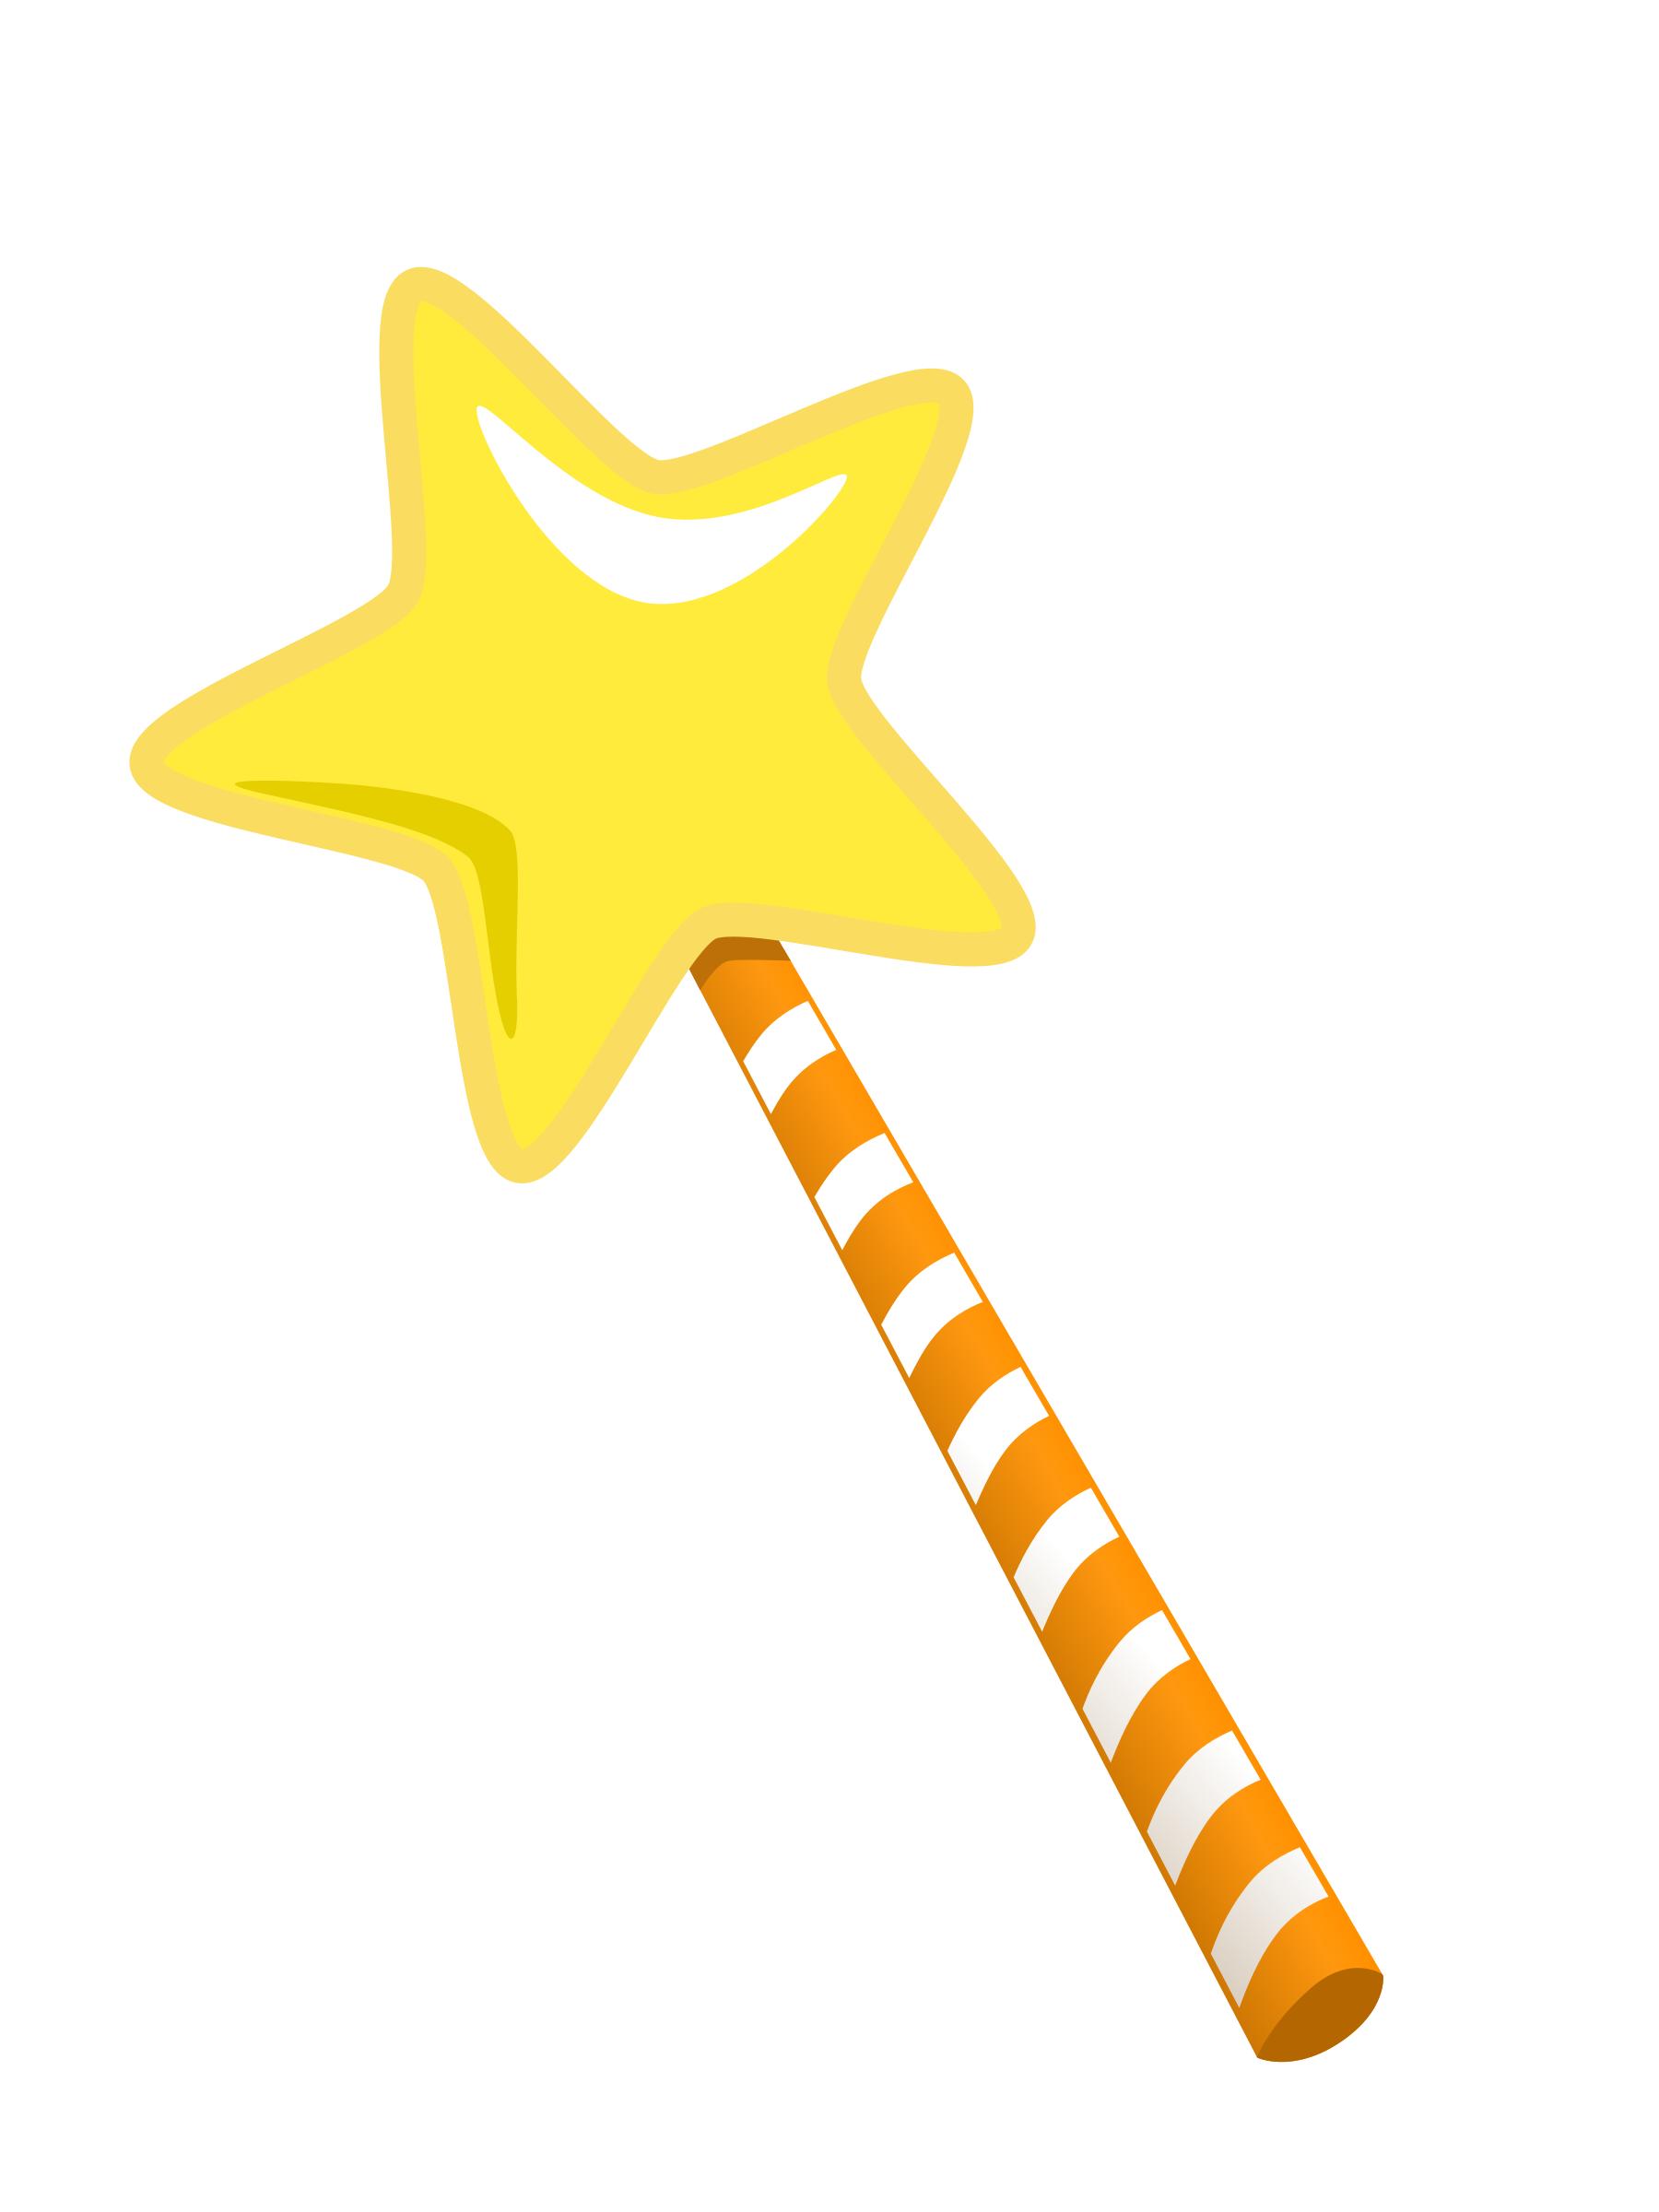 magic wand cartoon style Icons PNG - Free PNG and Icons Downloads